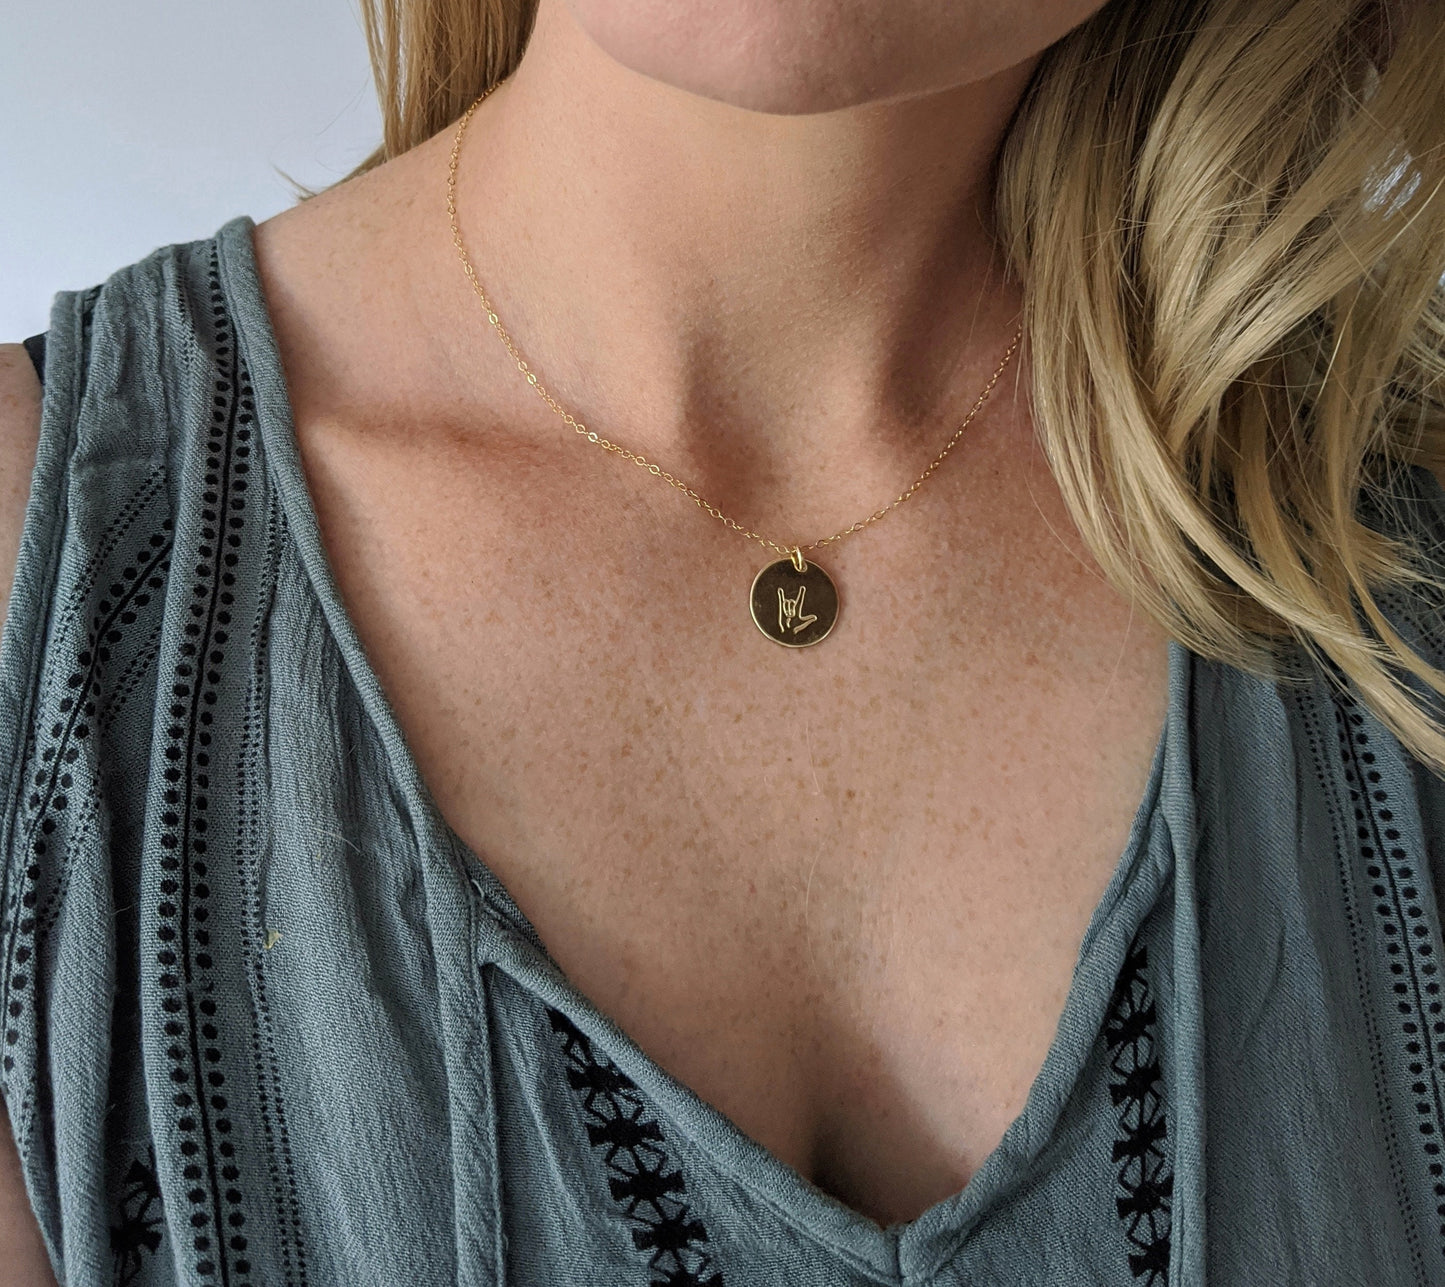 I Love You ASL Sign Necklaces For Besties & Sisters | ASL Jewelry | Gift Idea